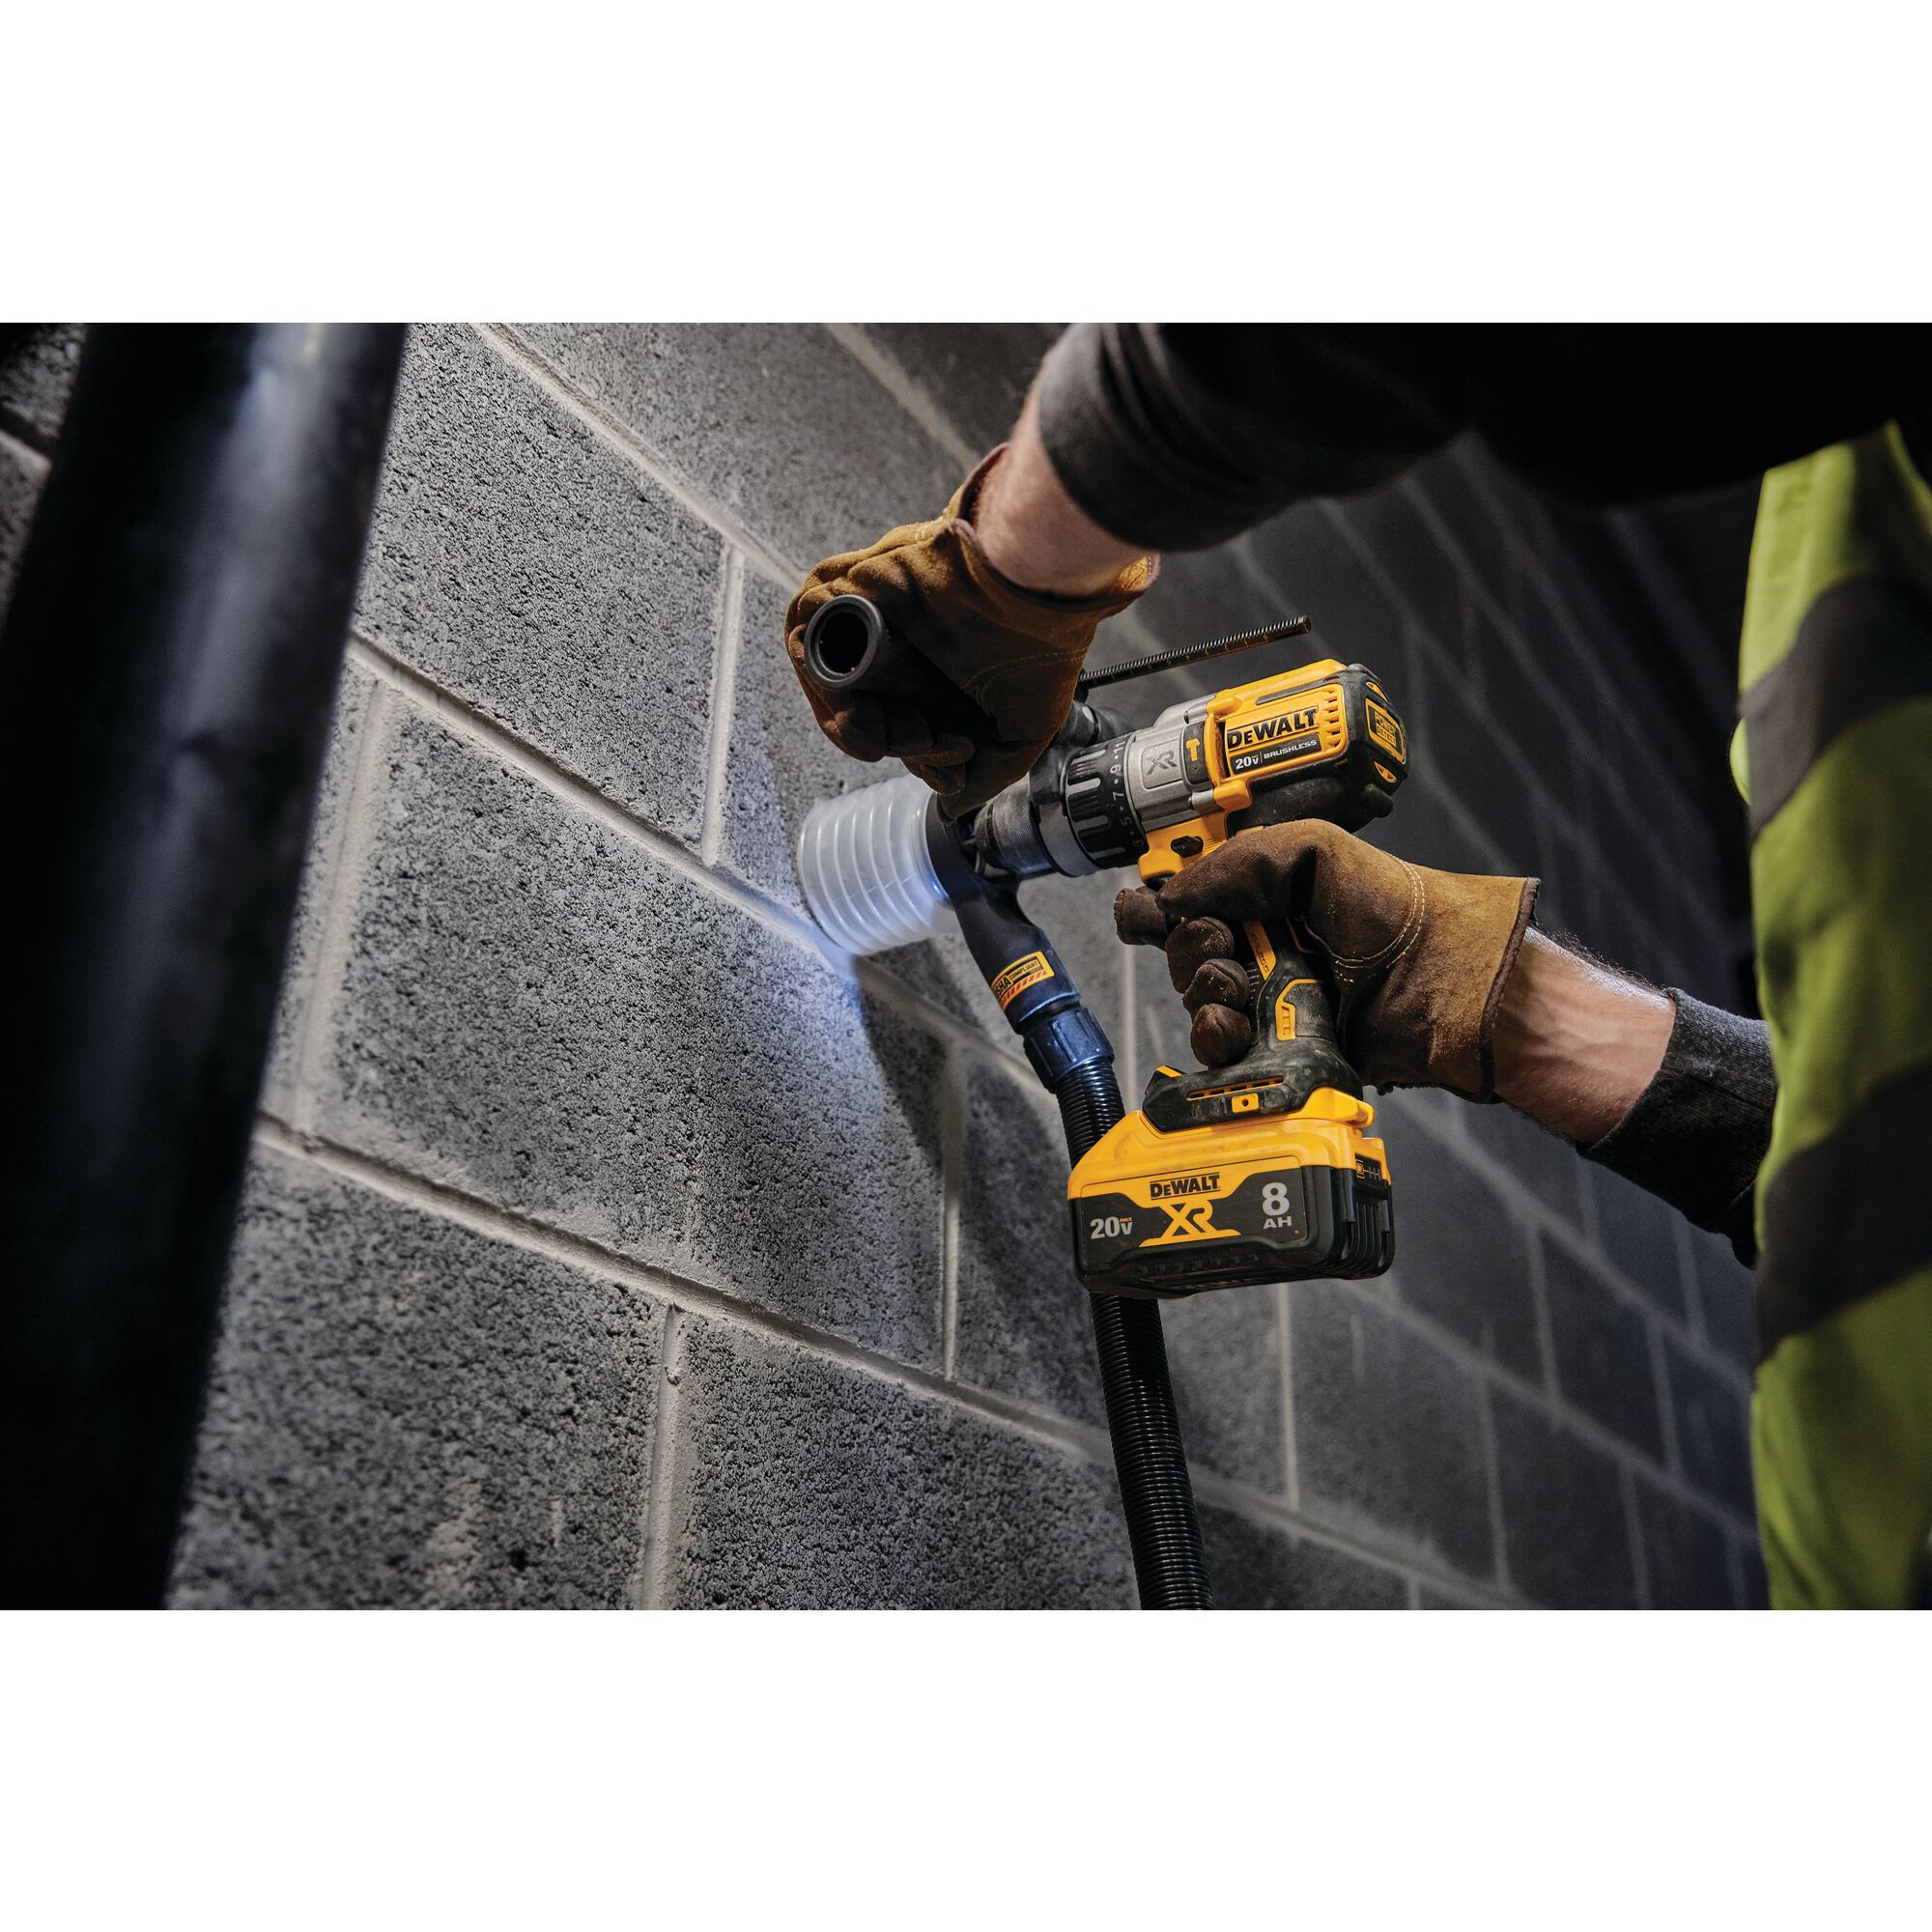 XR POWER DETECT 1/2-in Max-Amp Variable Brushless Cordless Hammer Drill (1-Battery Included) in the Hammer Drills department at Lowes.com